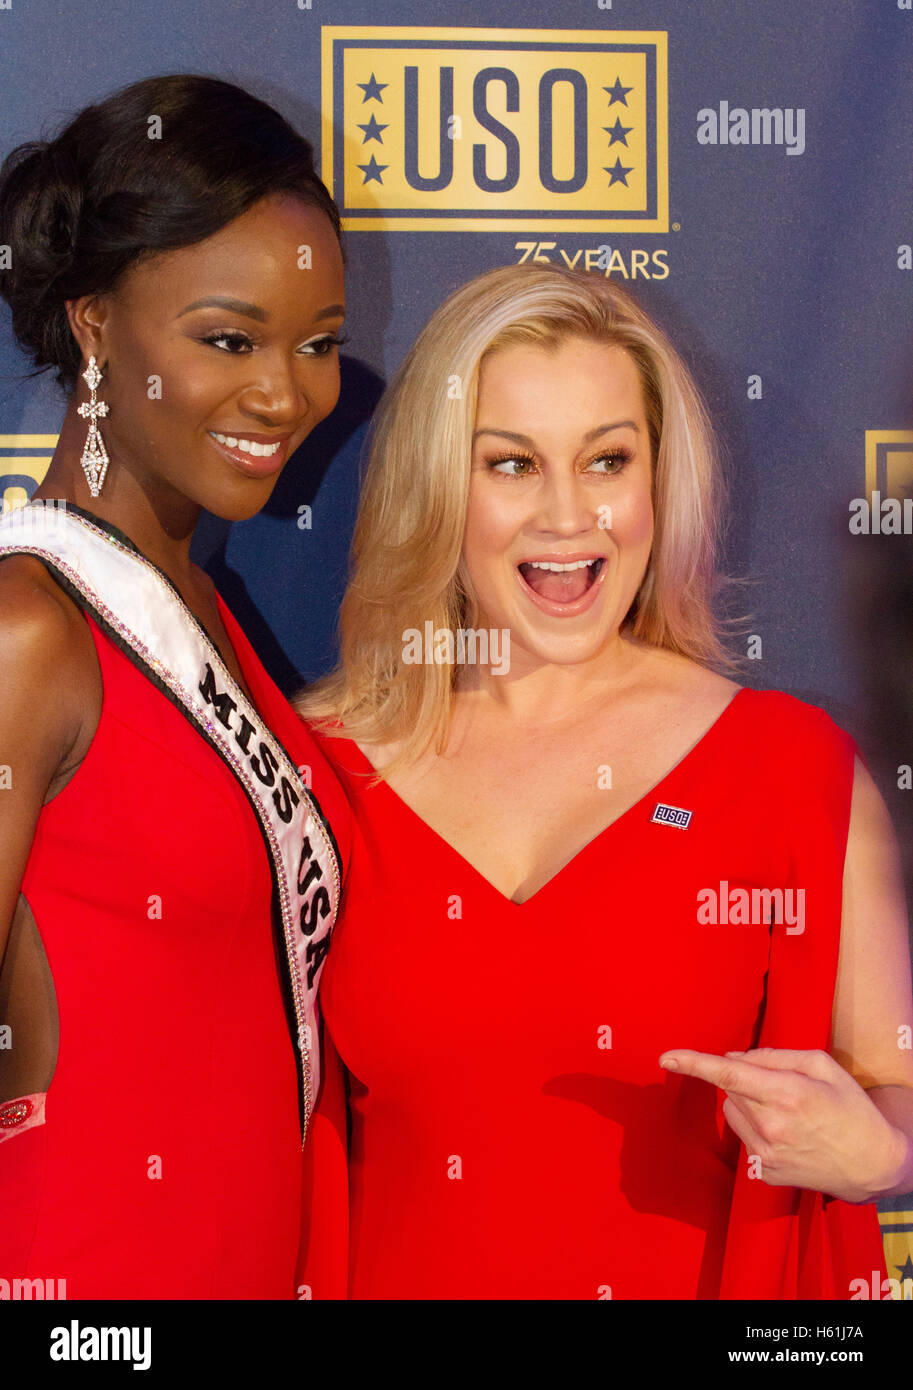 Kellie Pickler, American country music artist, television personality, American Idol contestant, and Deshauna Barber, Miss USA arrives on the red carpet for the USO Gala at the DAR Constitution Hall on October 20, 2016 in Washington DC. Stock Photo